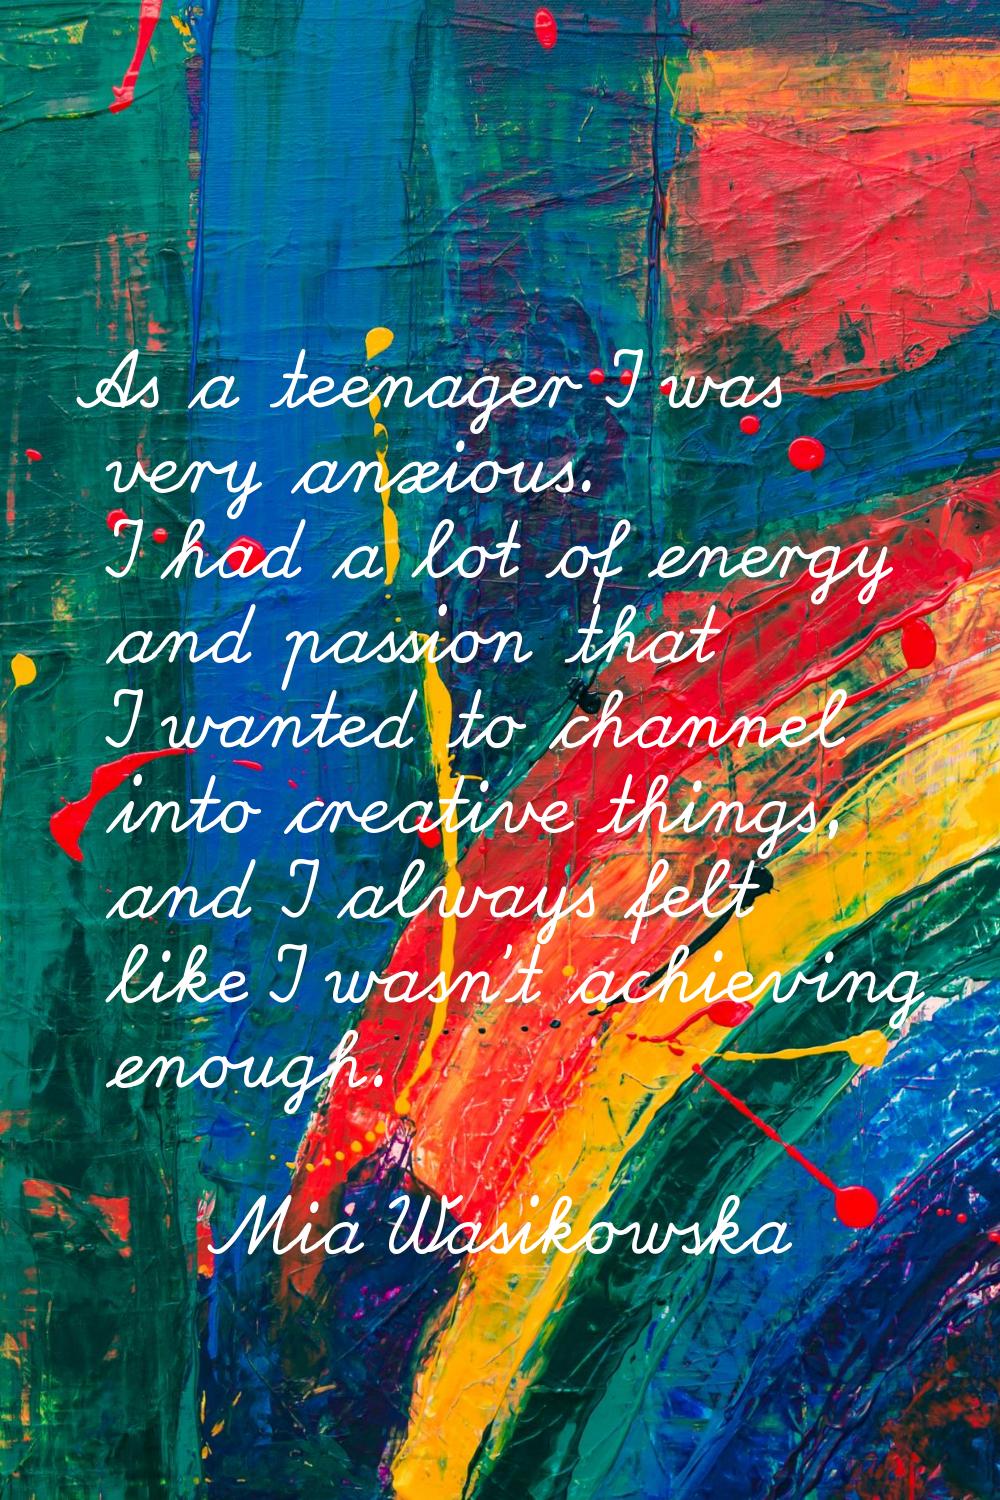 As a teenager I was very anxious. I had a lot of energy and passion that I wanted to channel into c